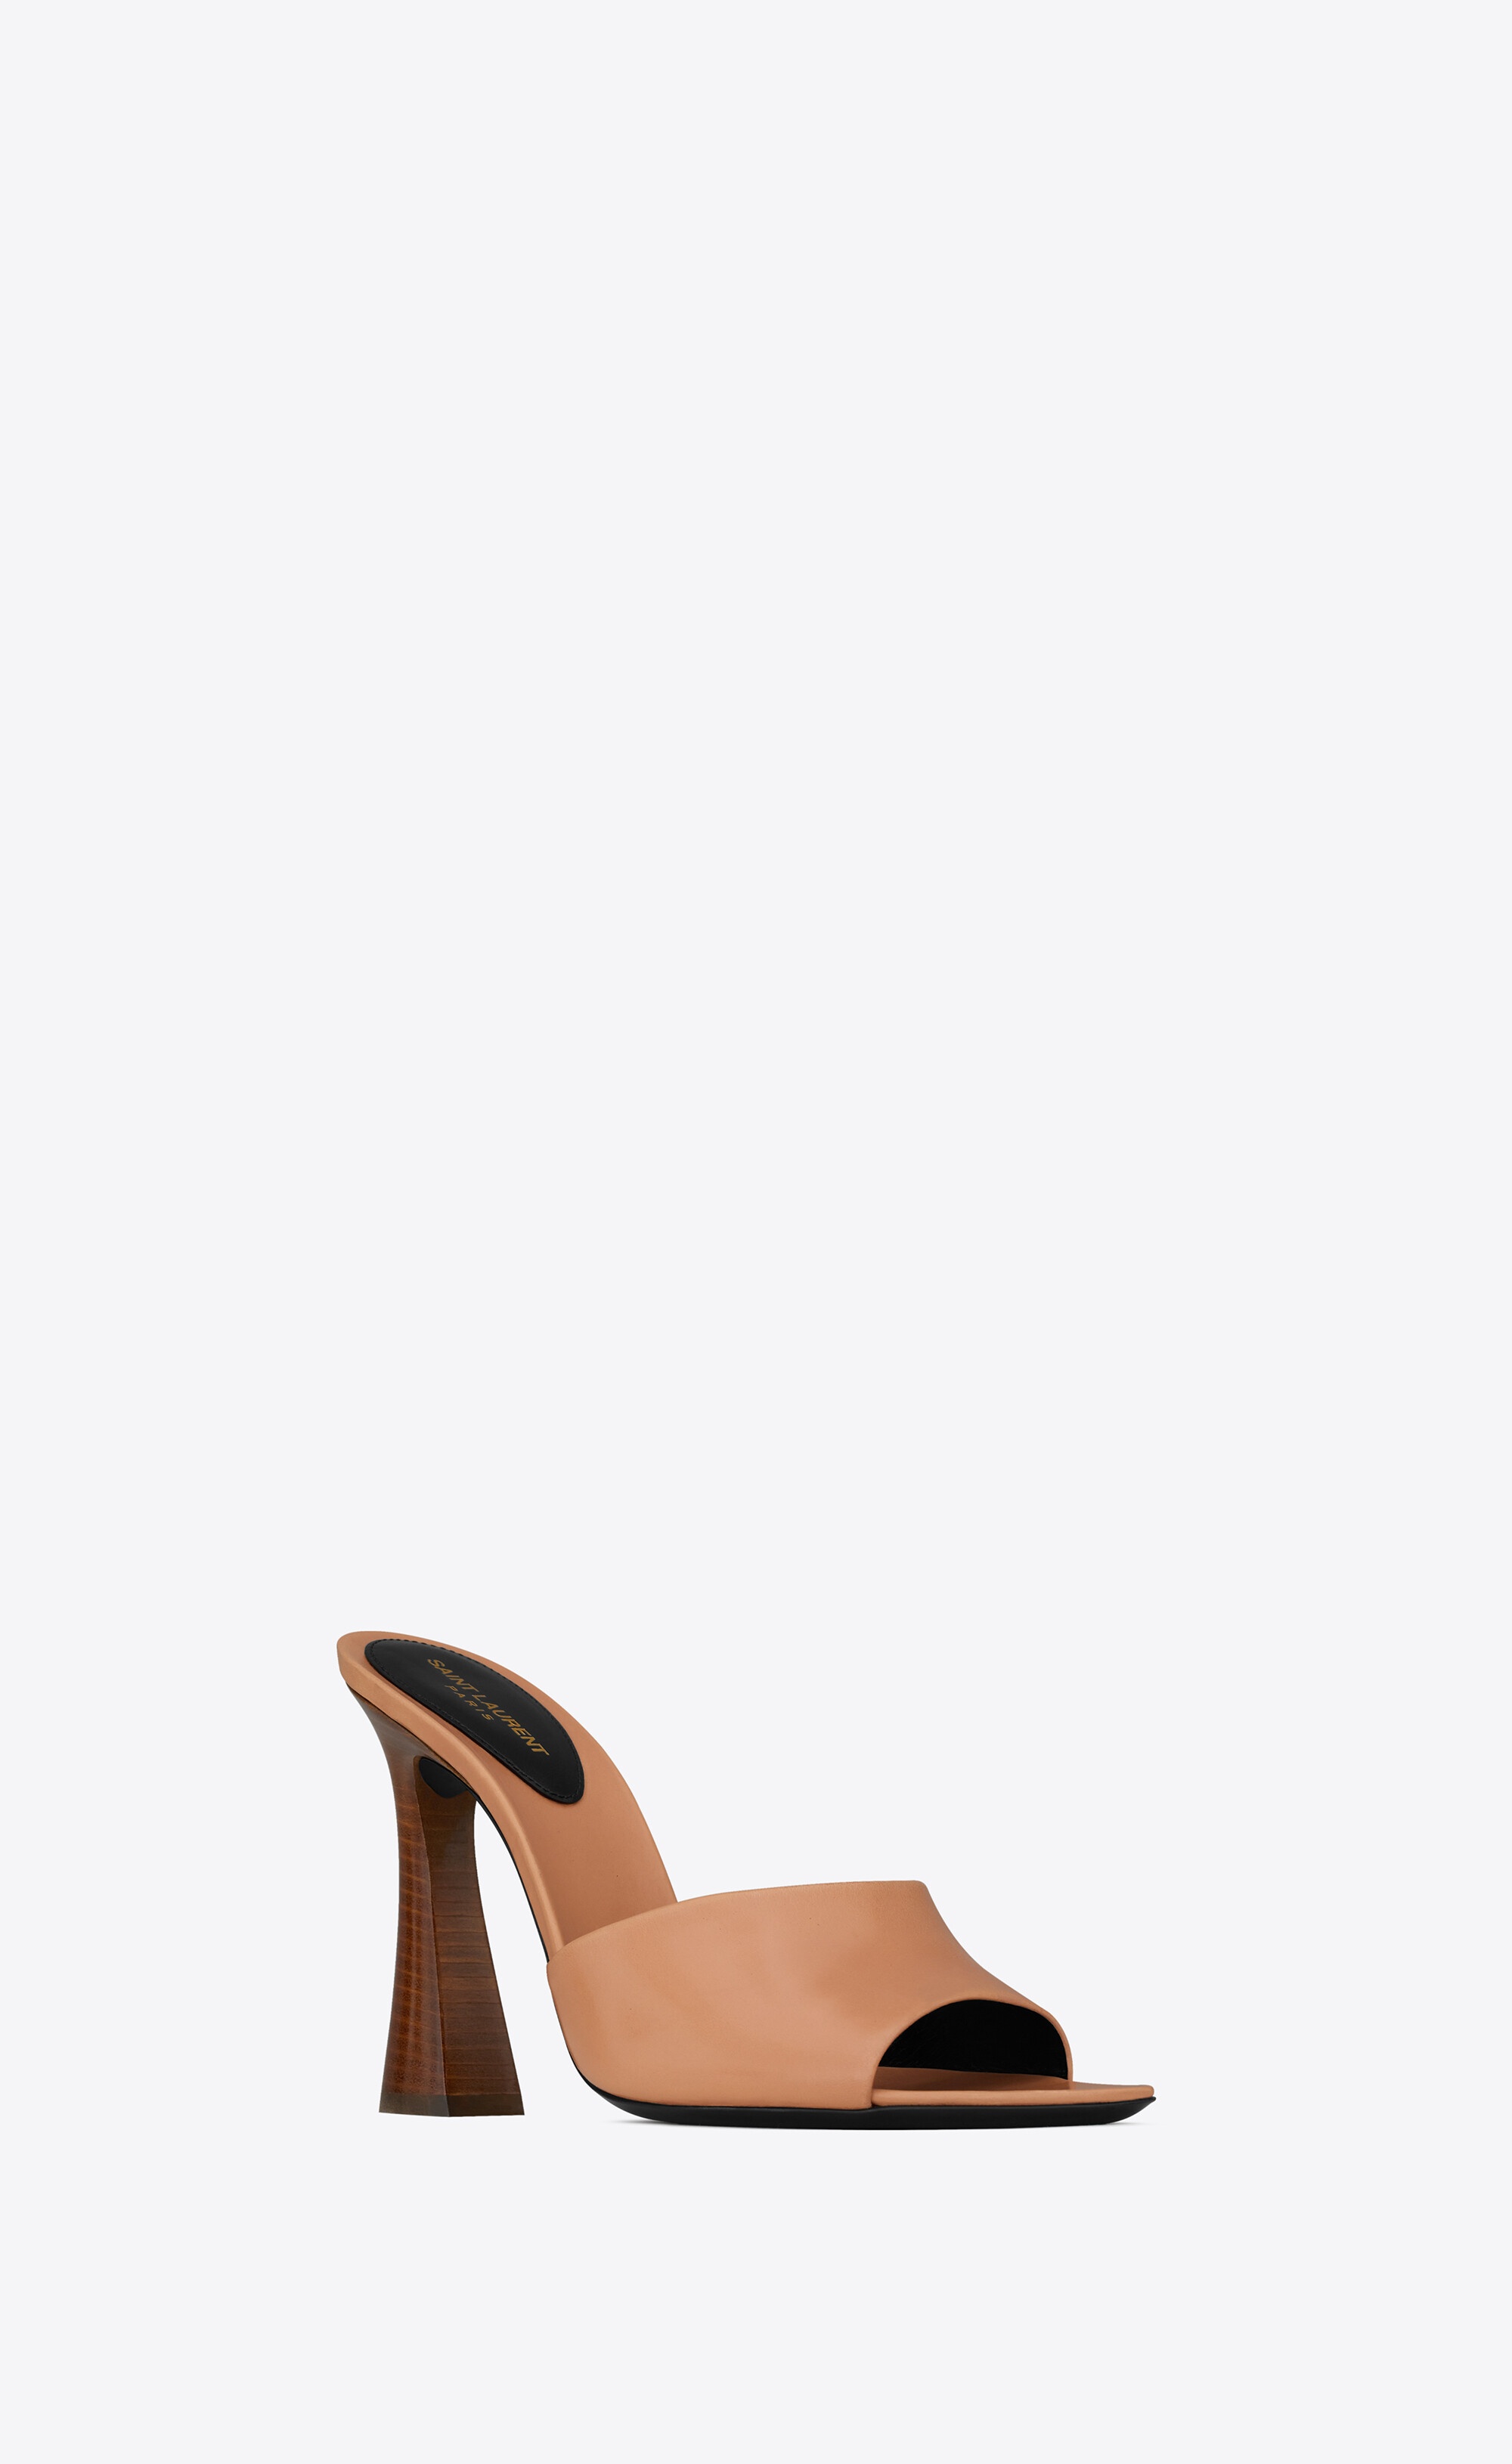 suite mules in shiny leather - 3